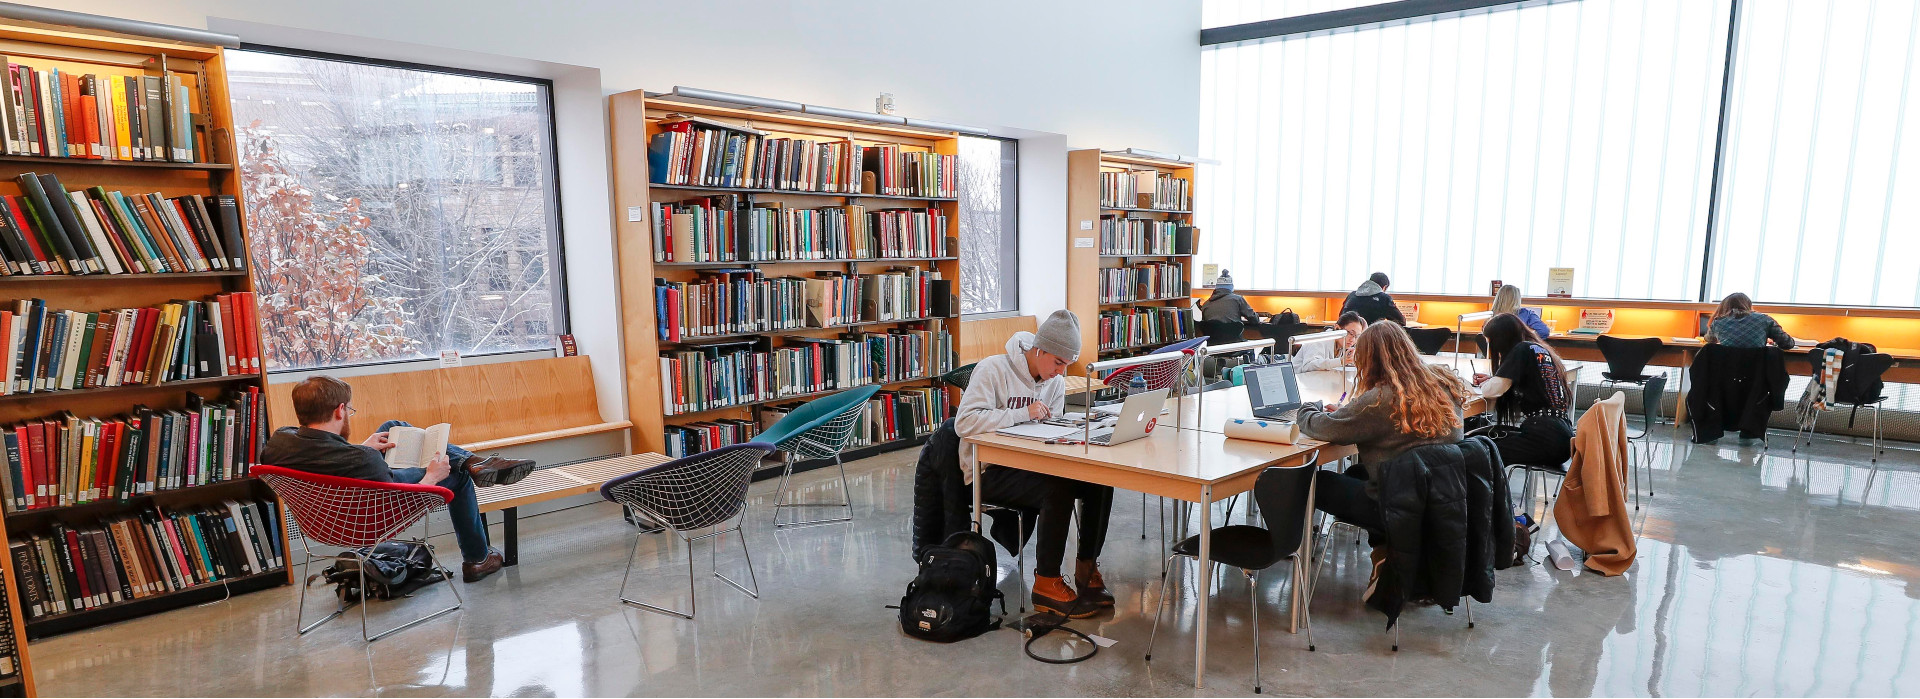 Students study in the library